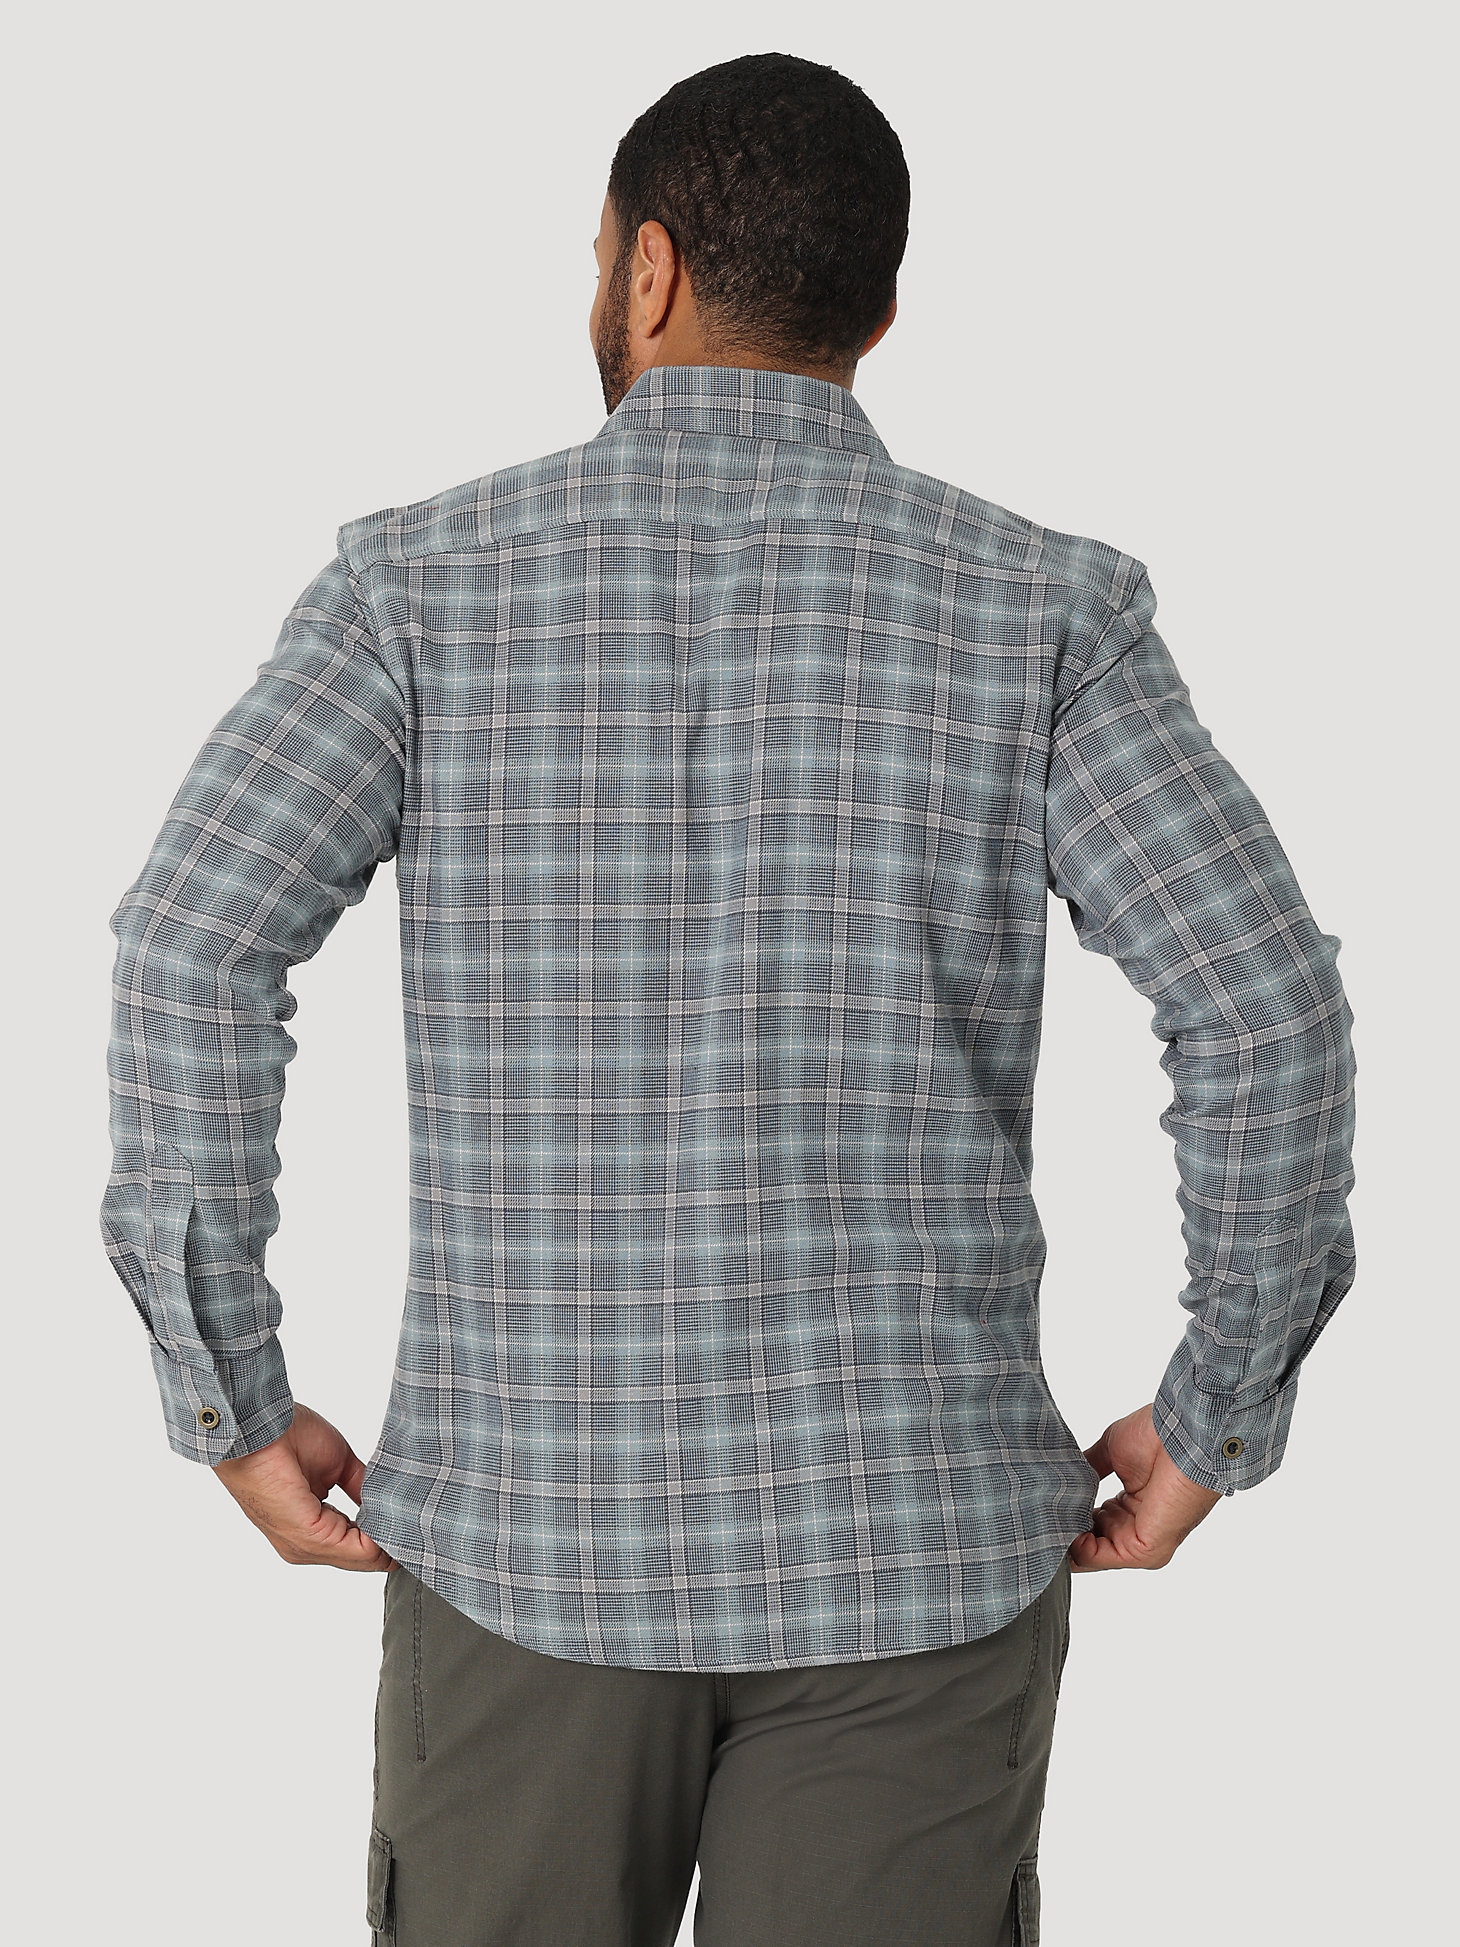 Men's Cloud Flannel™ Free To Stretch™ Shirt in Lead alternative view 1